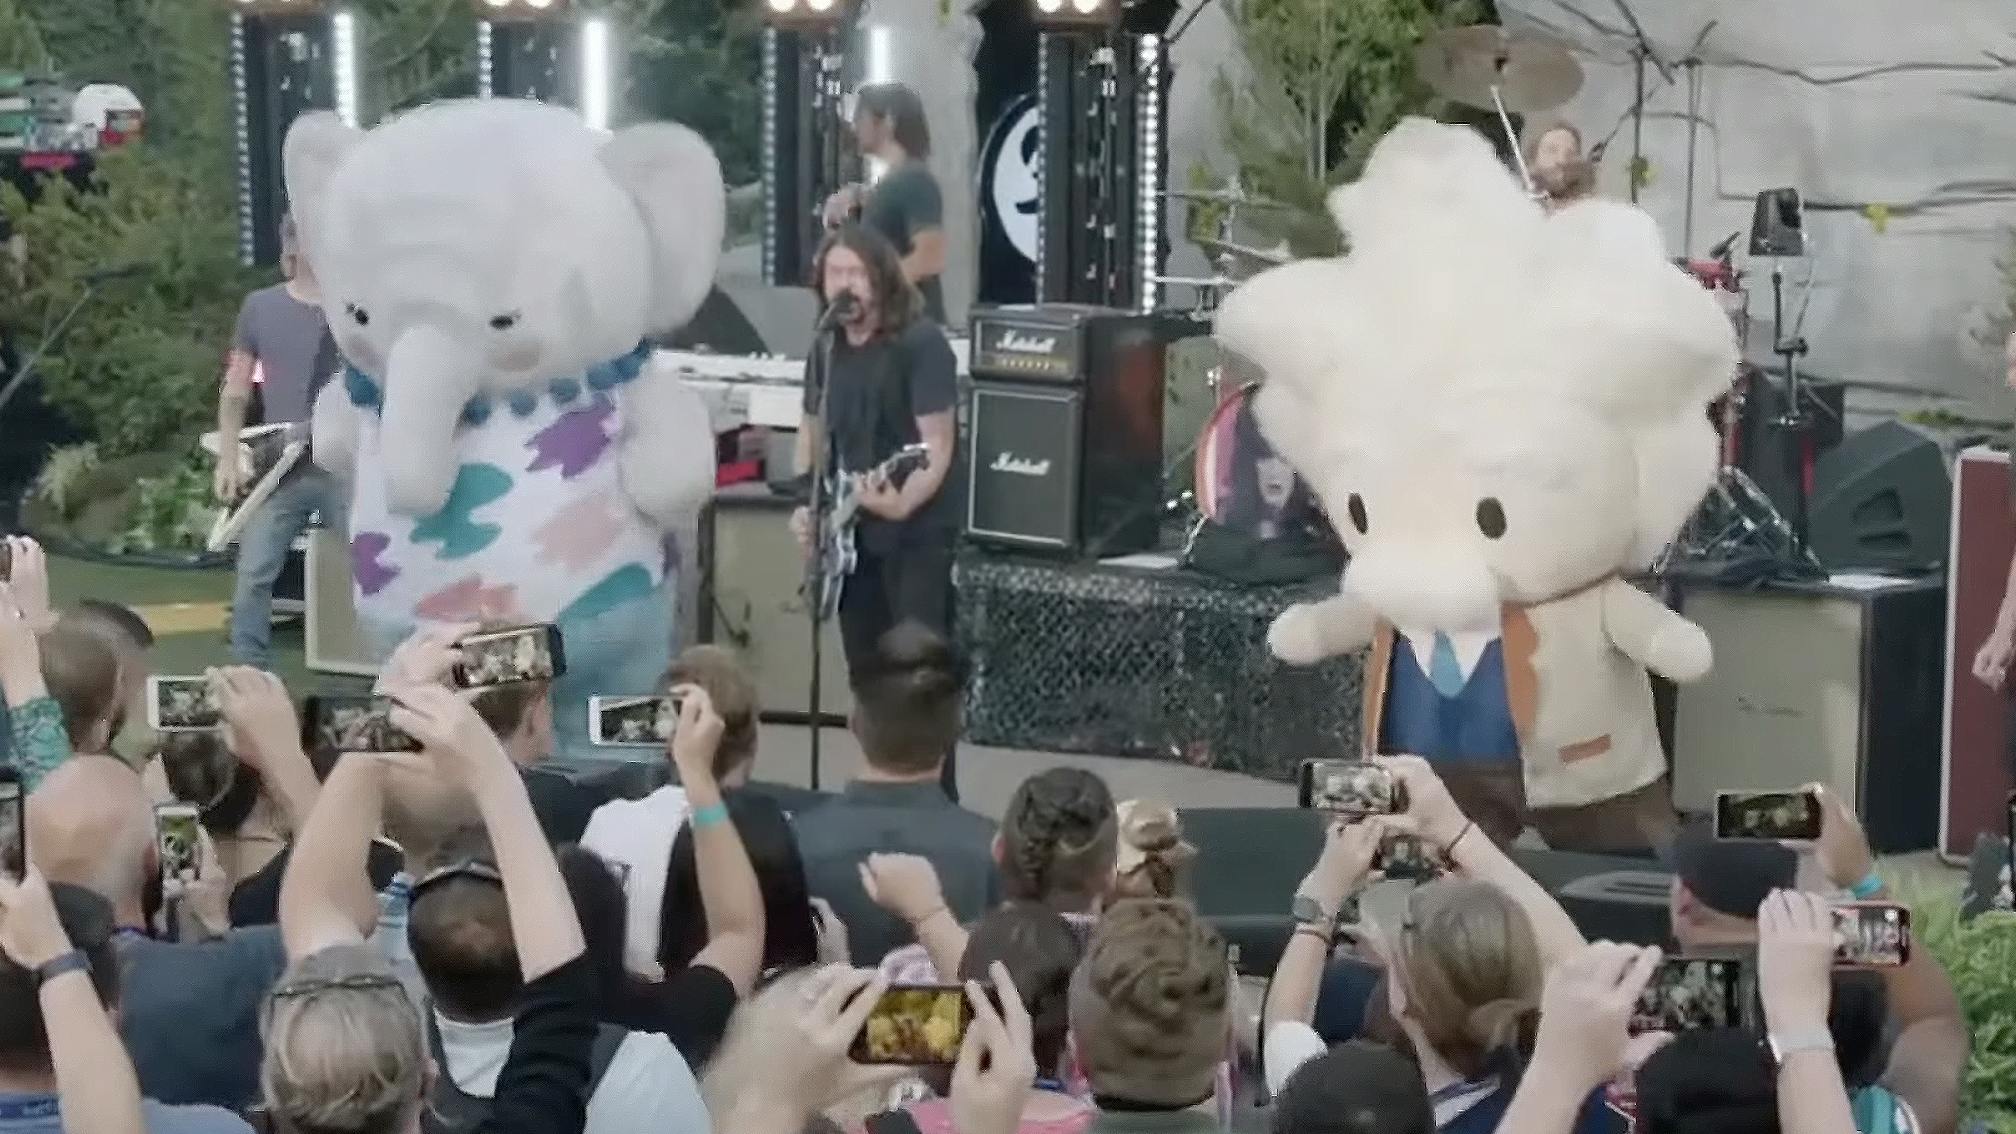 "Just when you thought the band couldn't get any bigger…" Foos perform live with weirdly cute dancing mascots